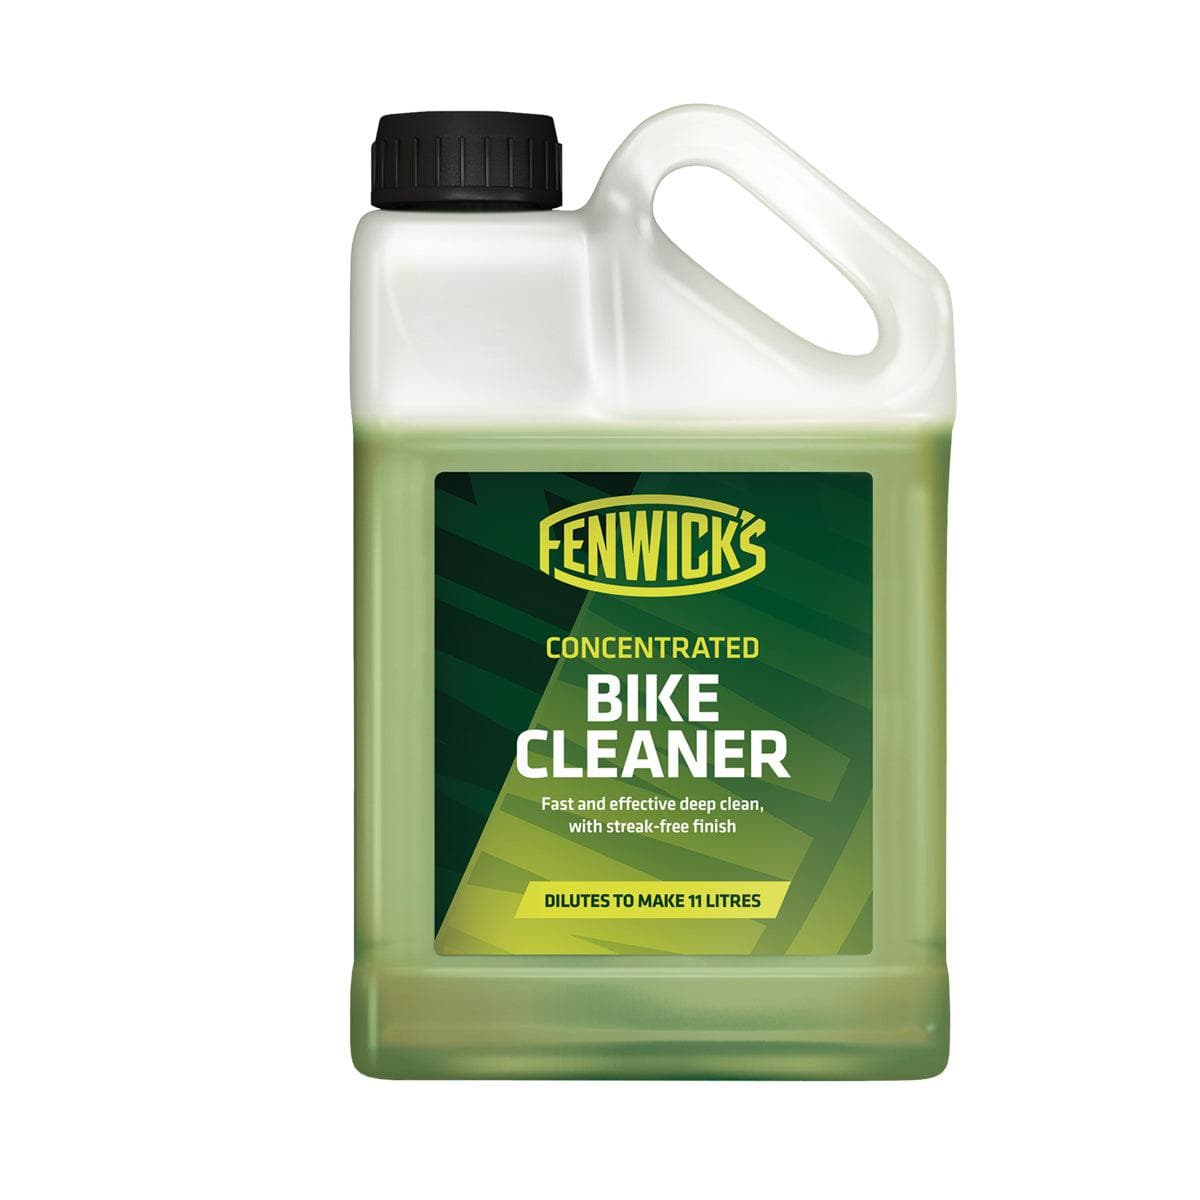 Fenwick'S Concentrated Bike Cleaner 1 Litre: